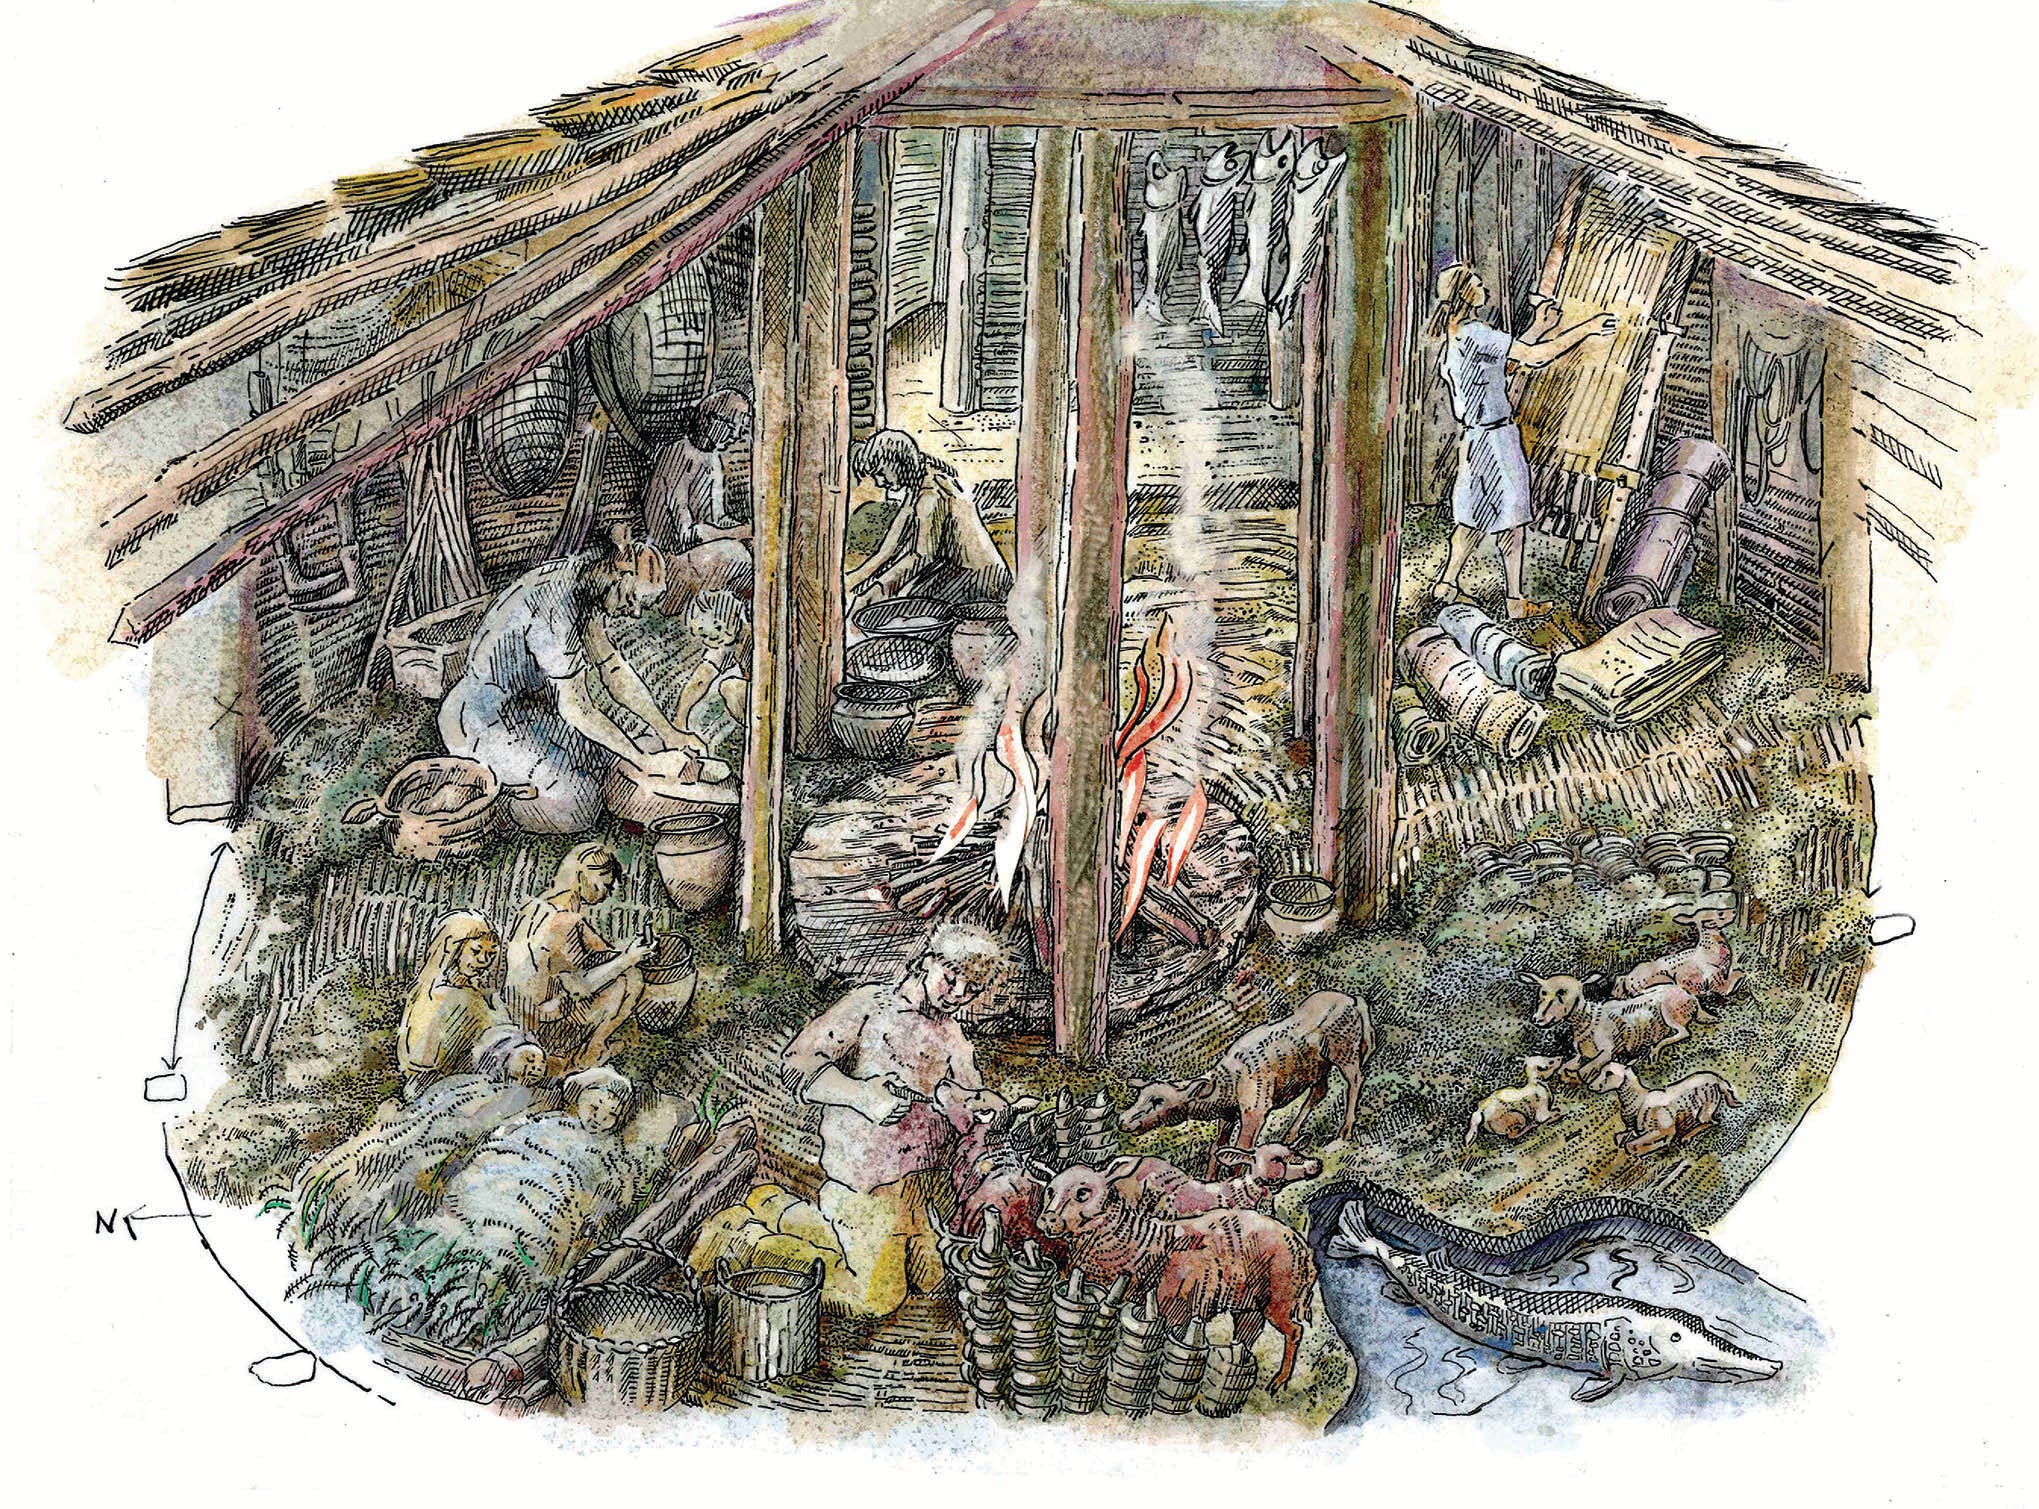 an illustration of domestic life in the bronze age fenlands. a cooking fire is in the middle, with several humans  working inside with animals